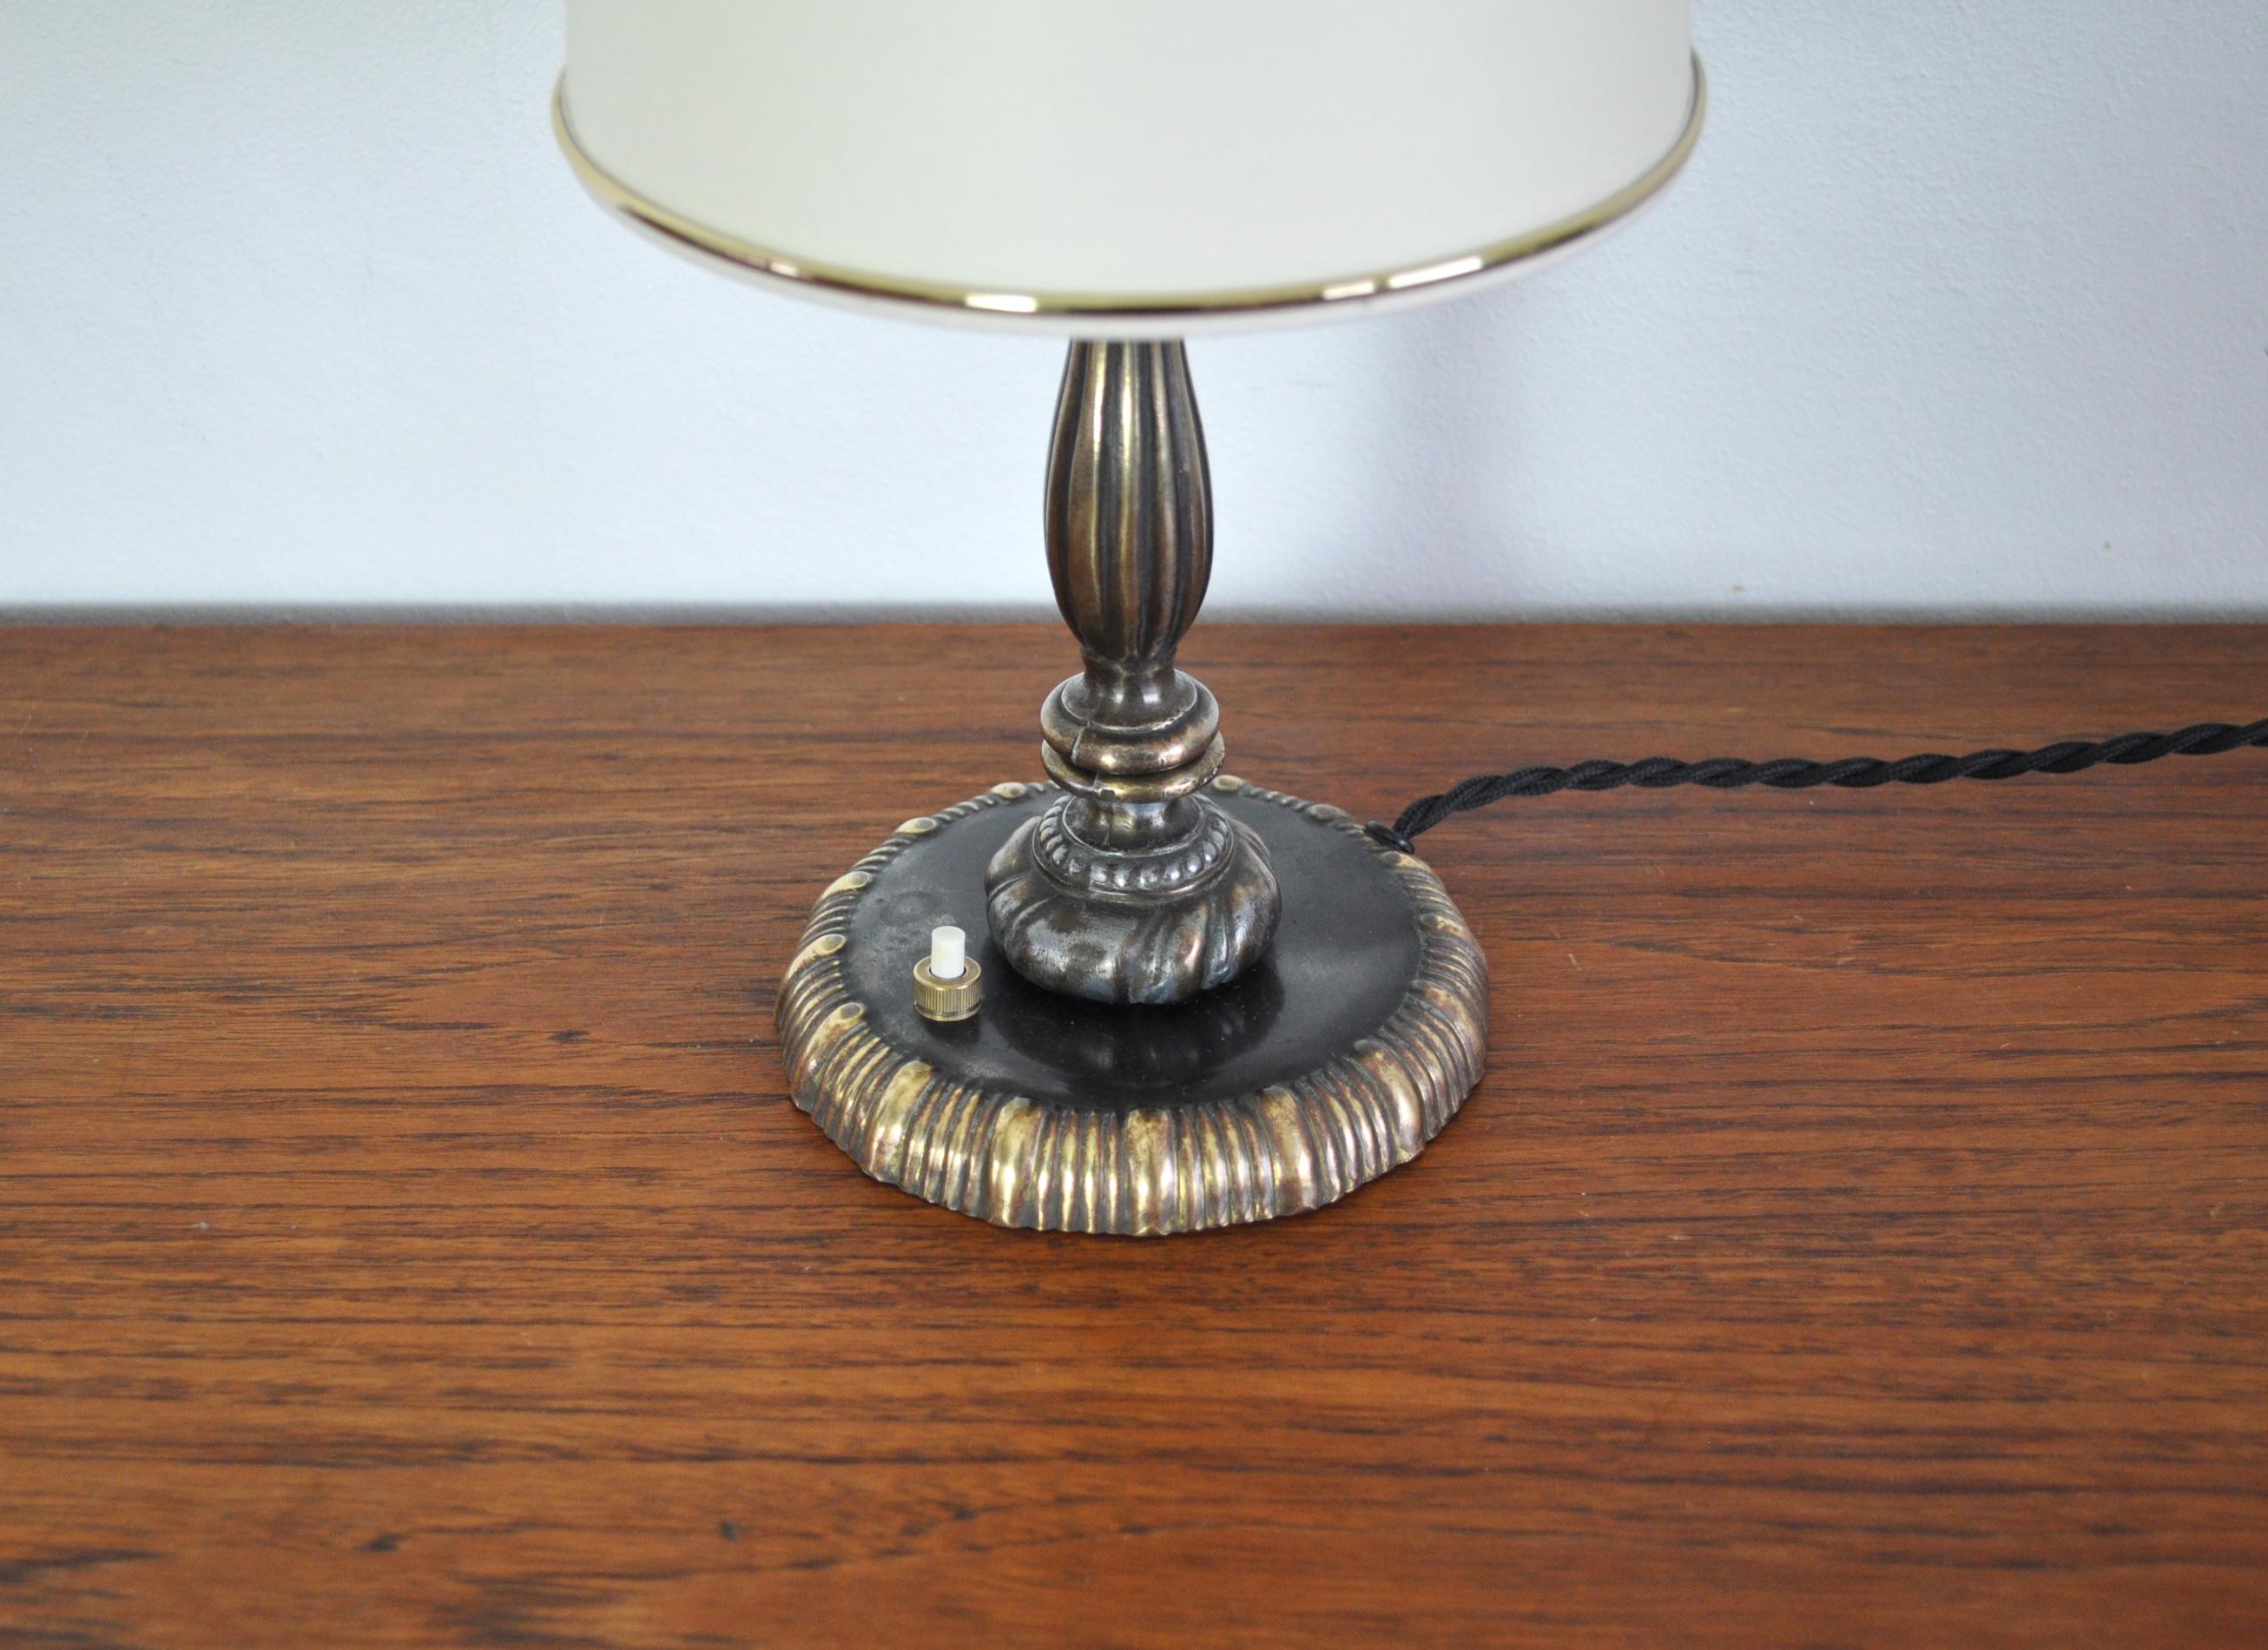 Art Nouveau Table Lamp Early 20th Century In Good Condition For Sale In Vordingborg, DK